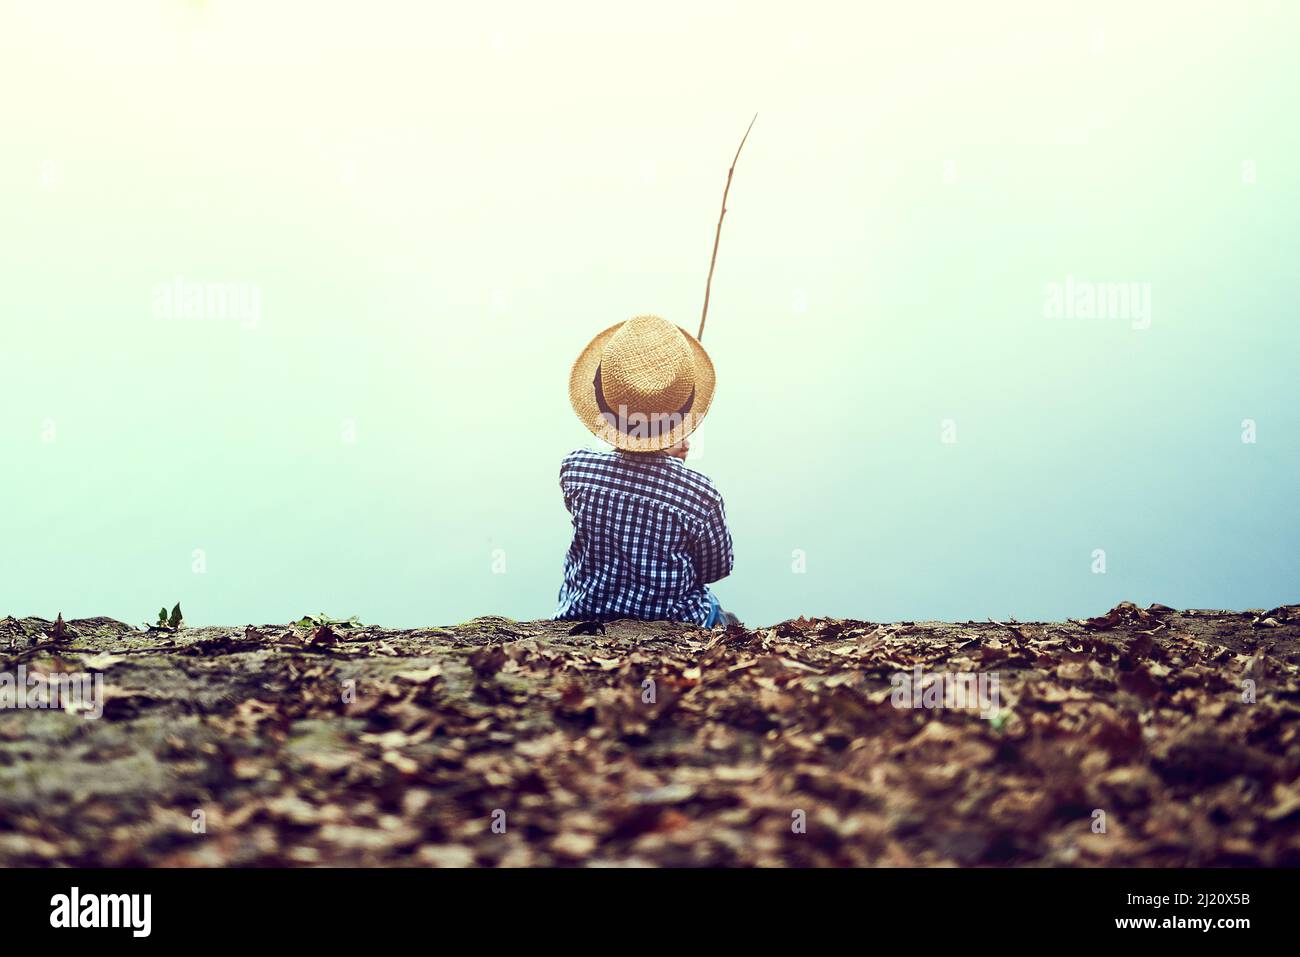 My all-time favourite thing to do is fishing. Rearview shot of a little boy fishing in the forest. Stock Photo